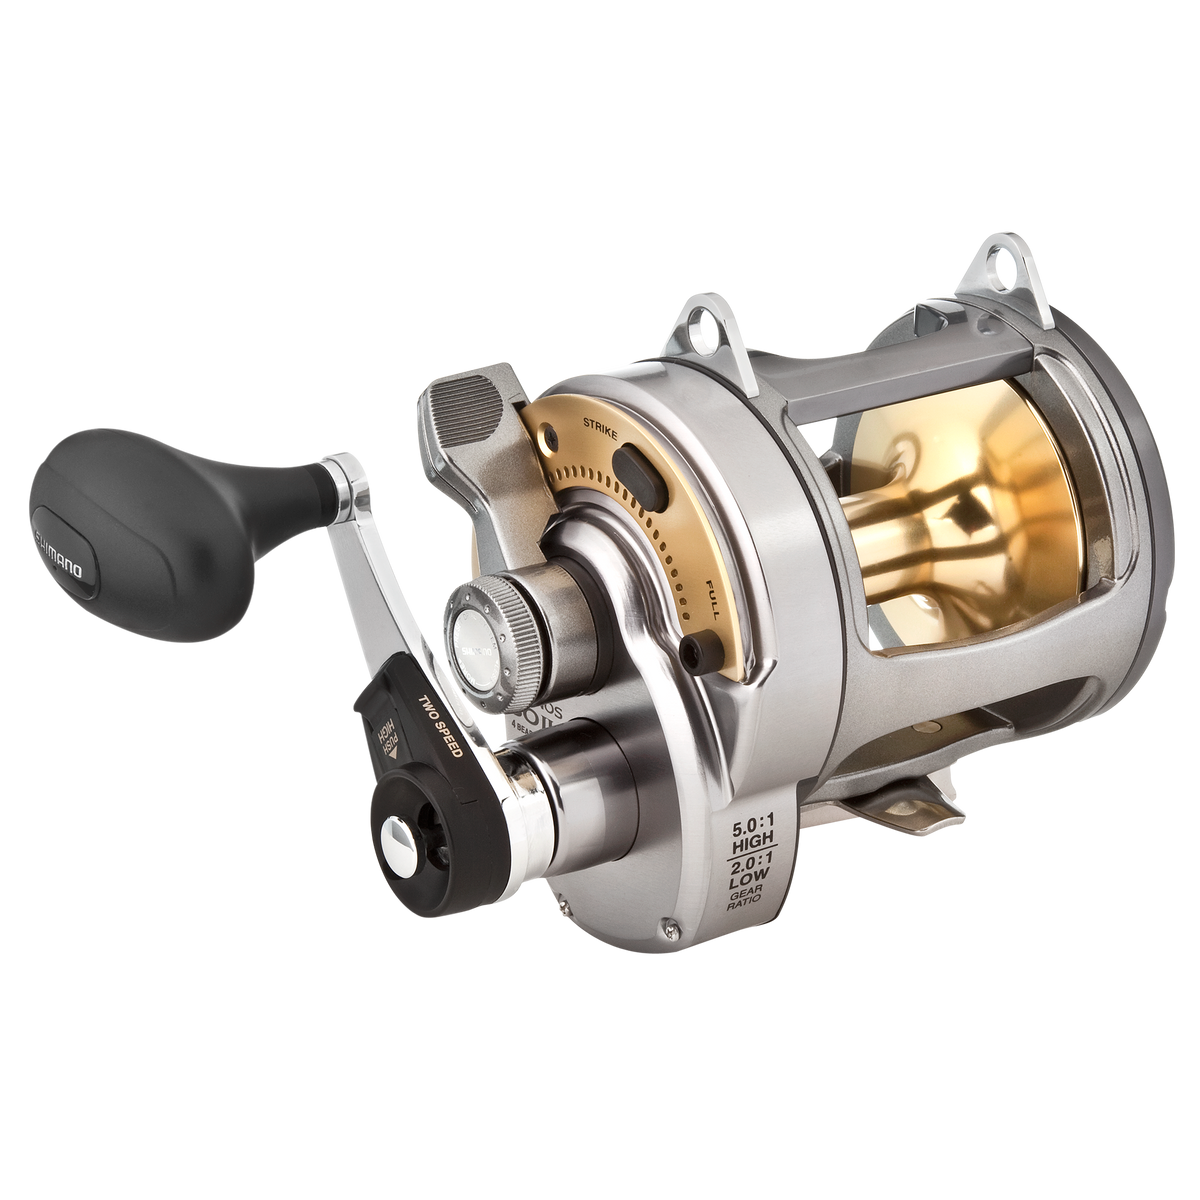 Shimano Tyrnos 30 Overhead Lever Drag Game Reel - 2 Speed